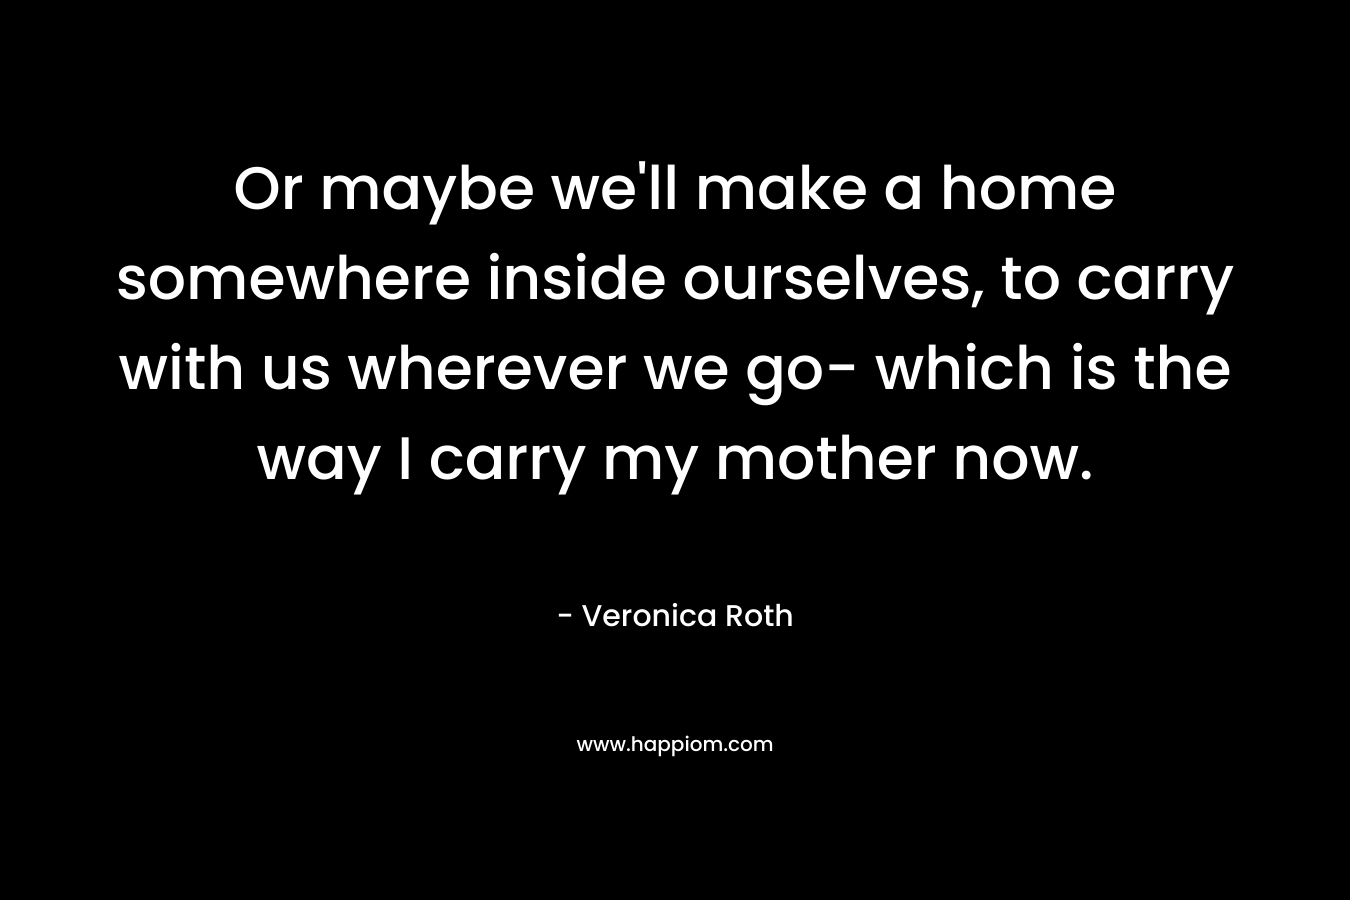 Or maybe we'll make a home somewhere inside ourselves, to carry with us wherever we go- which is the way I carry my mother now.